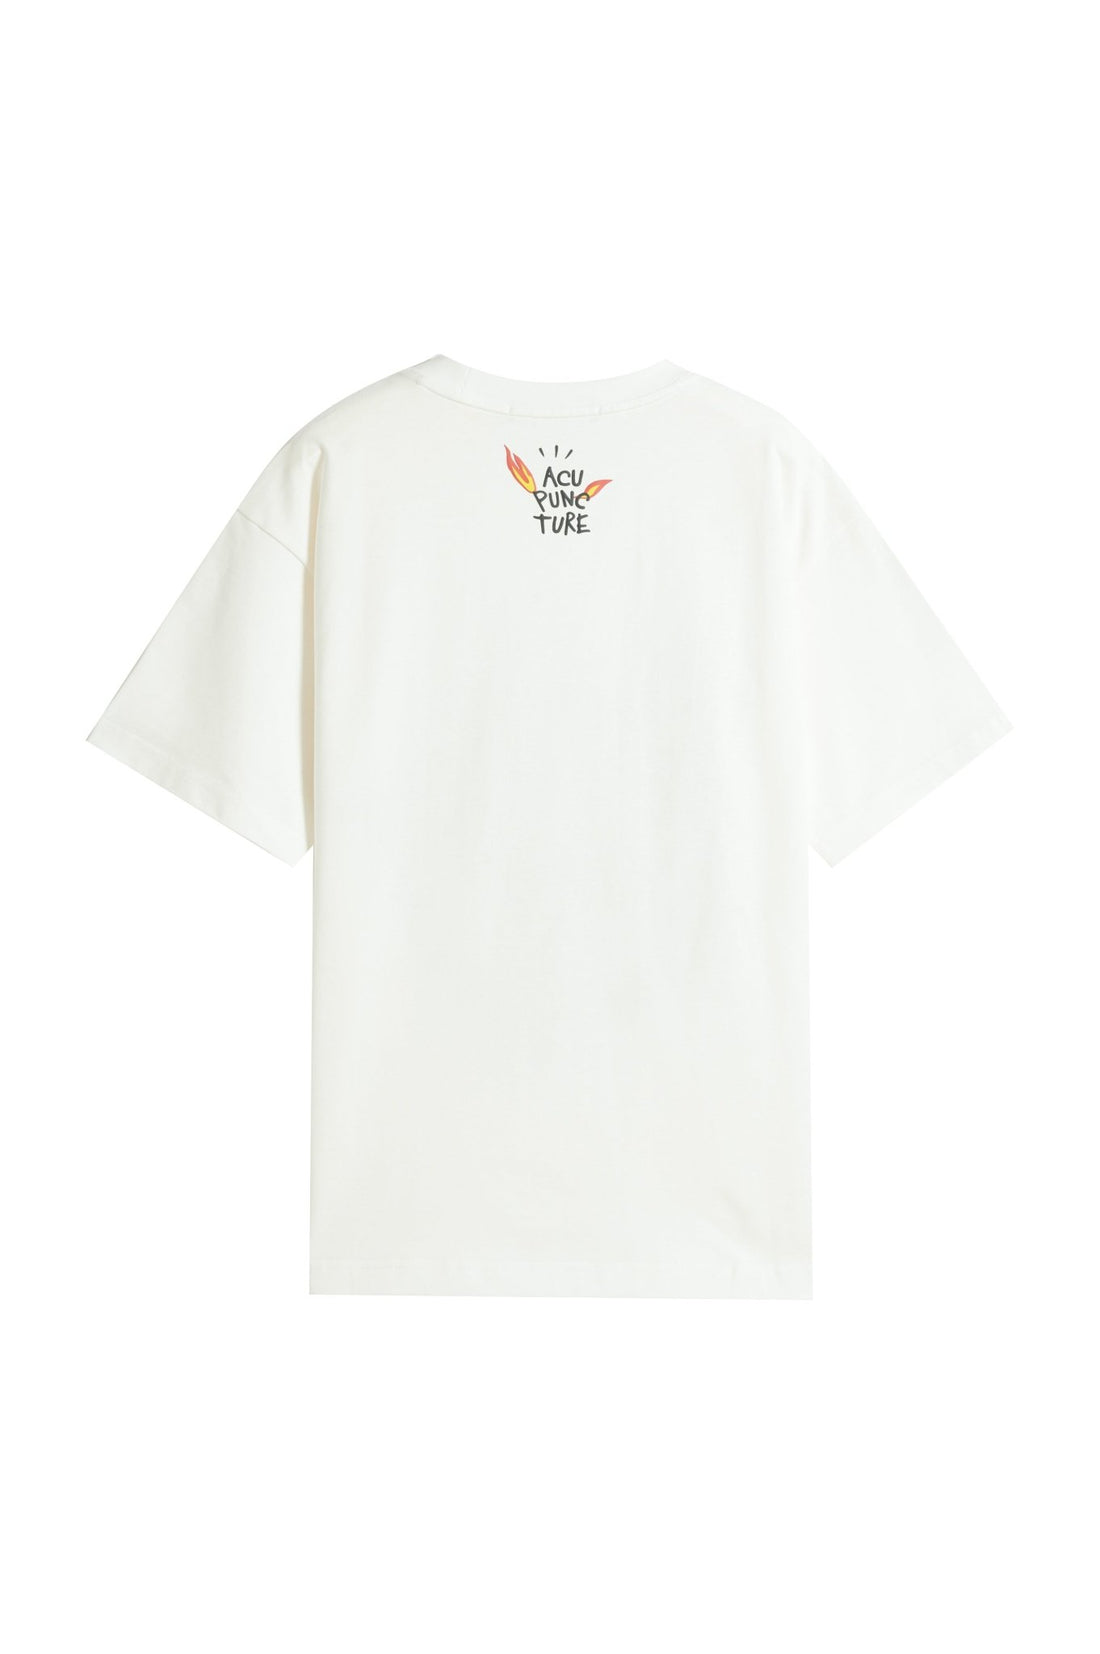 FLAMED LOGO TSHIRT WHITE Acupuncture